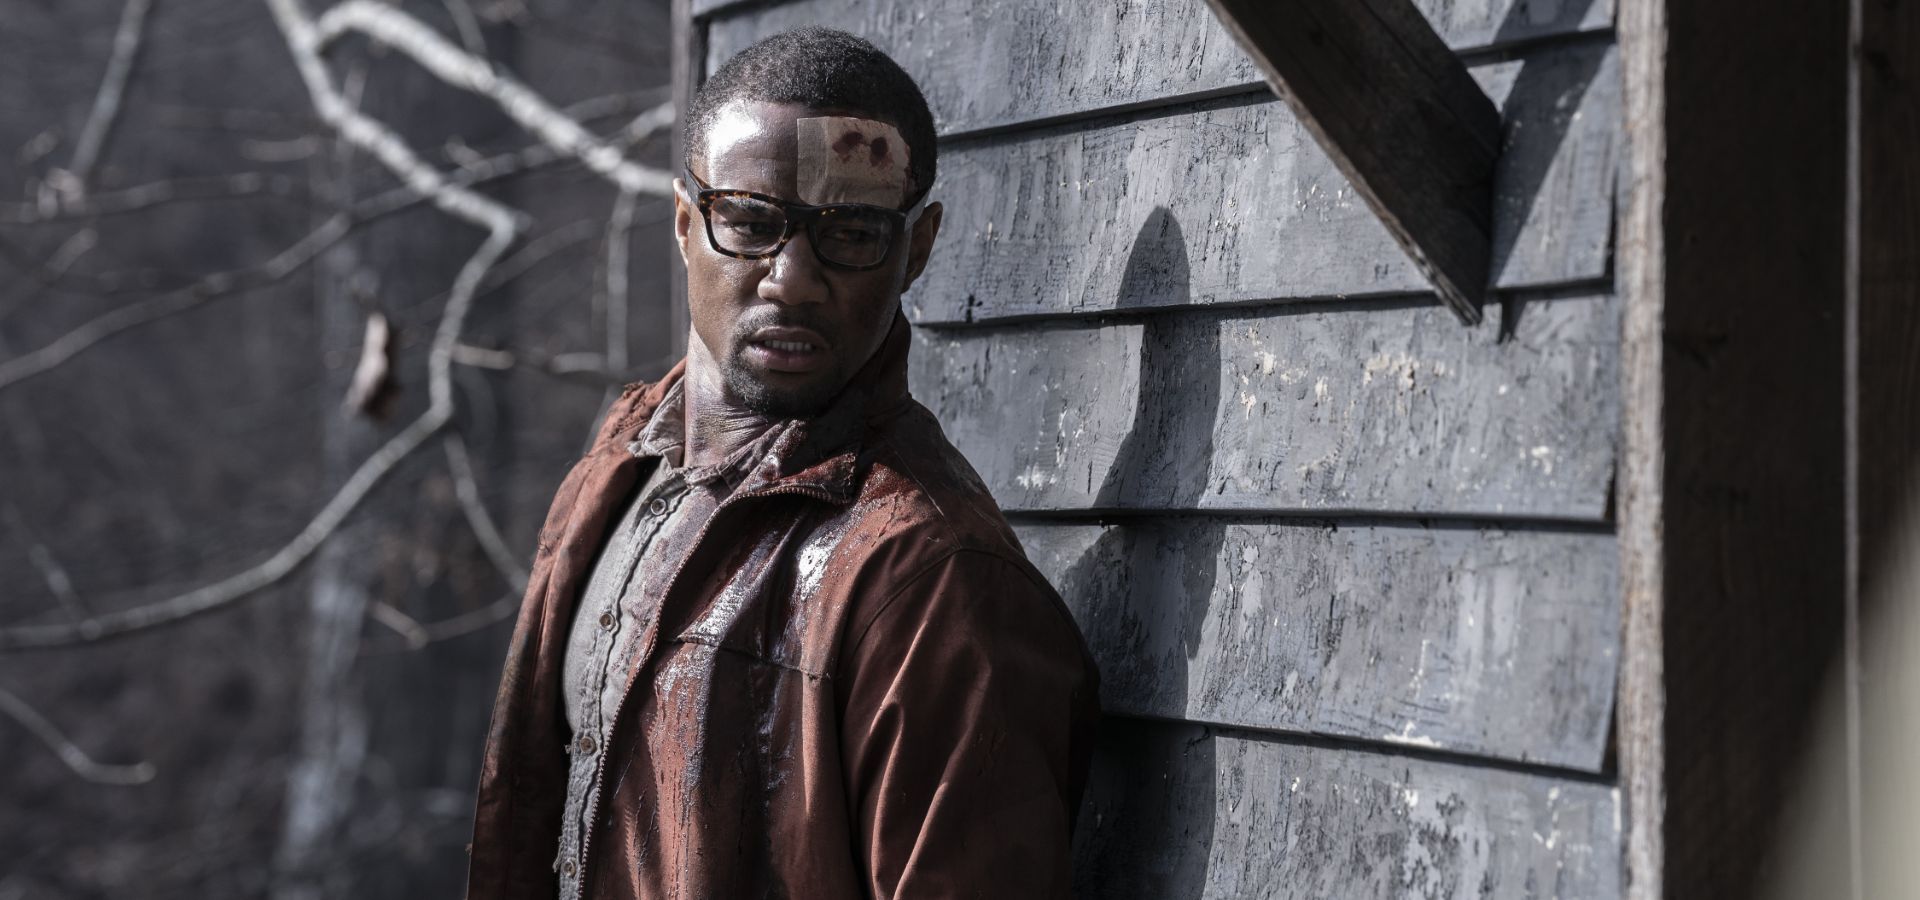 Tales of the Walking Dead Q&A — Jessie T. Usher’s Davon Is Ready For His Next Adventure